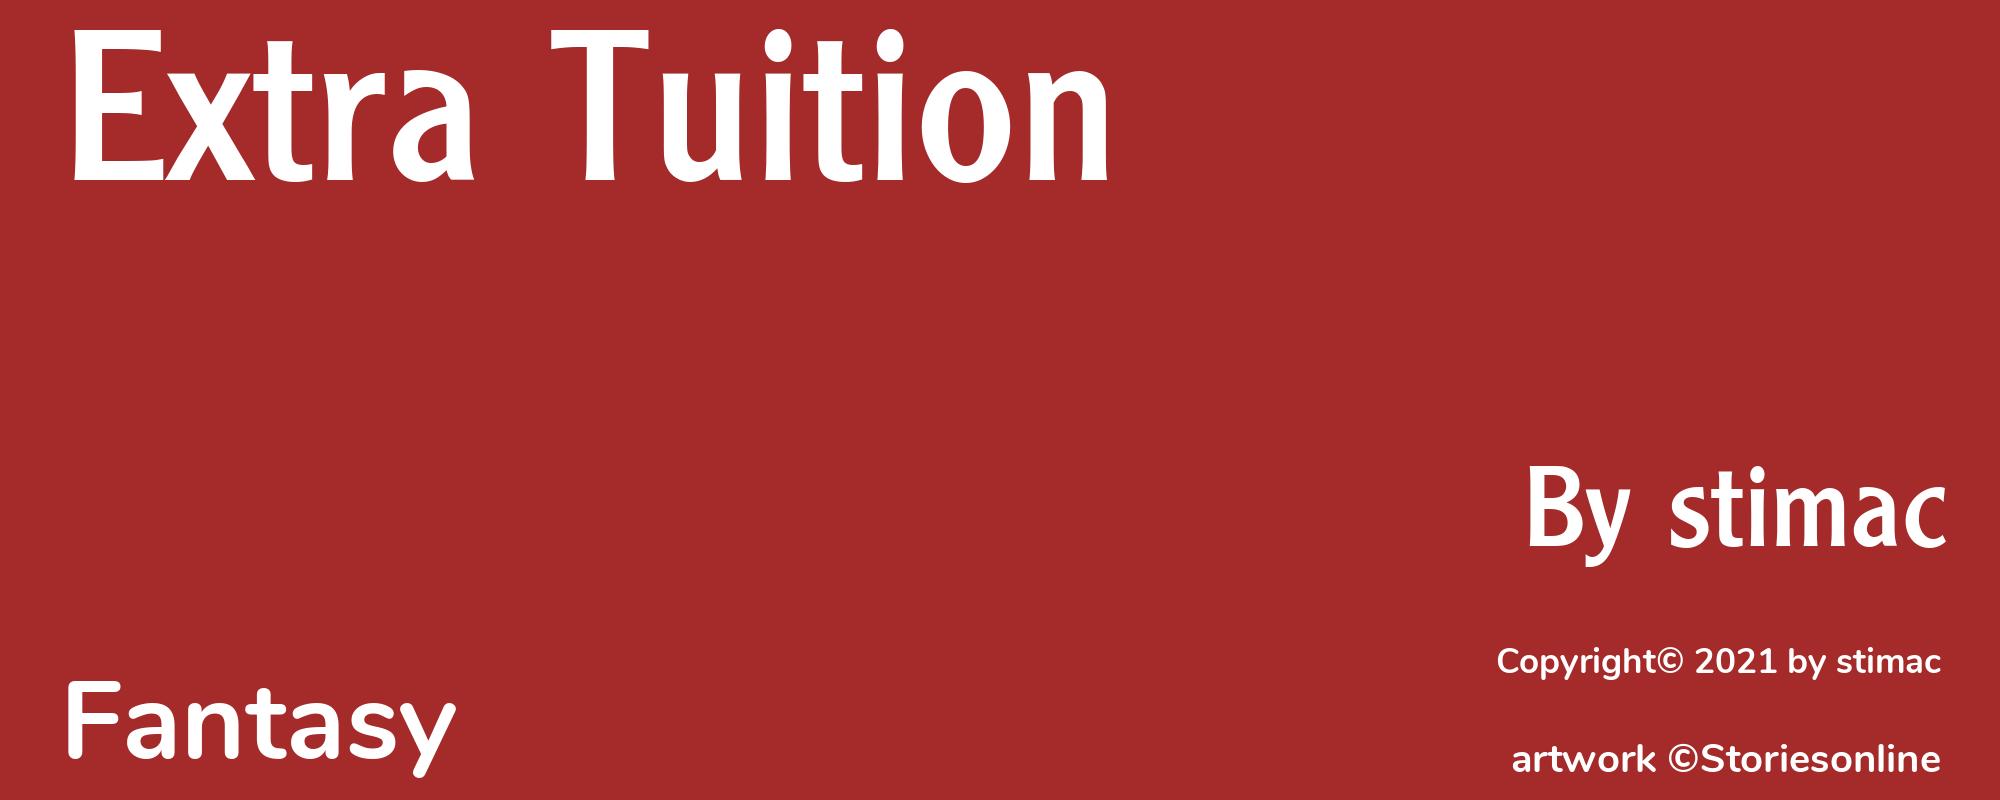 Extra Tuition - Cover